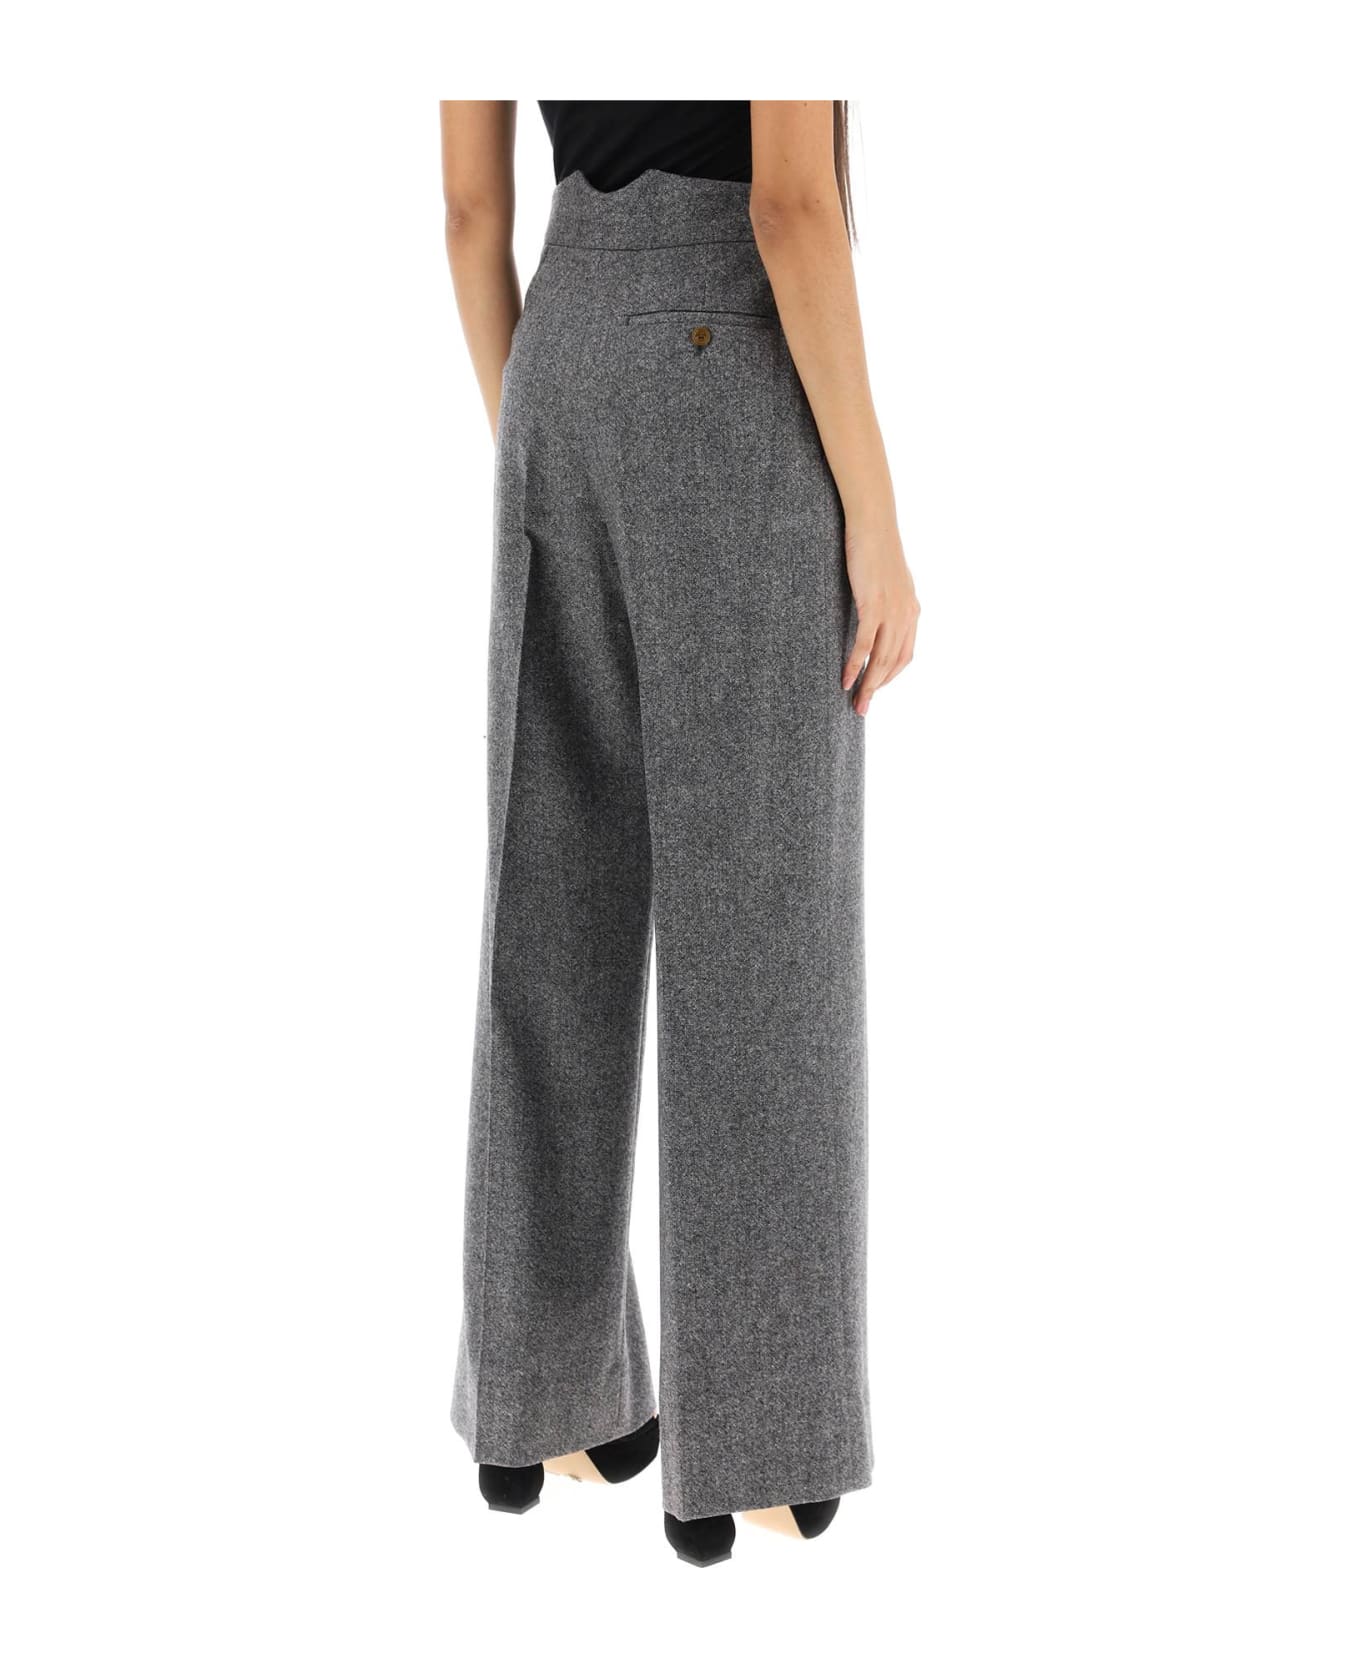 Vivienne Westwood Lauren Trousers In Donegal Tweed - BLACK WHITE (White) ボトムス